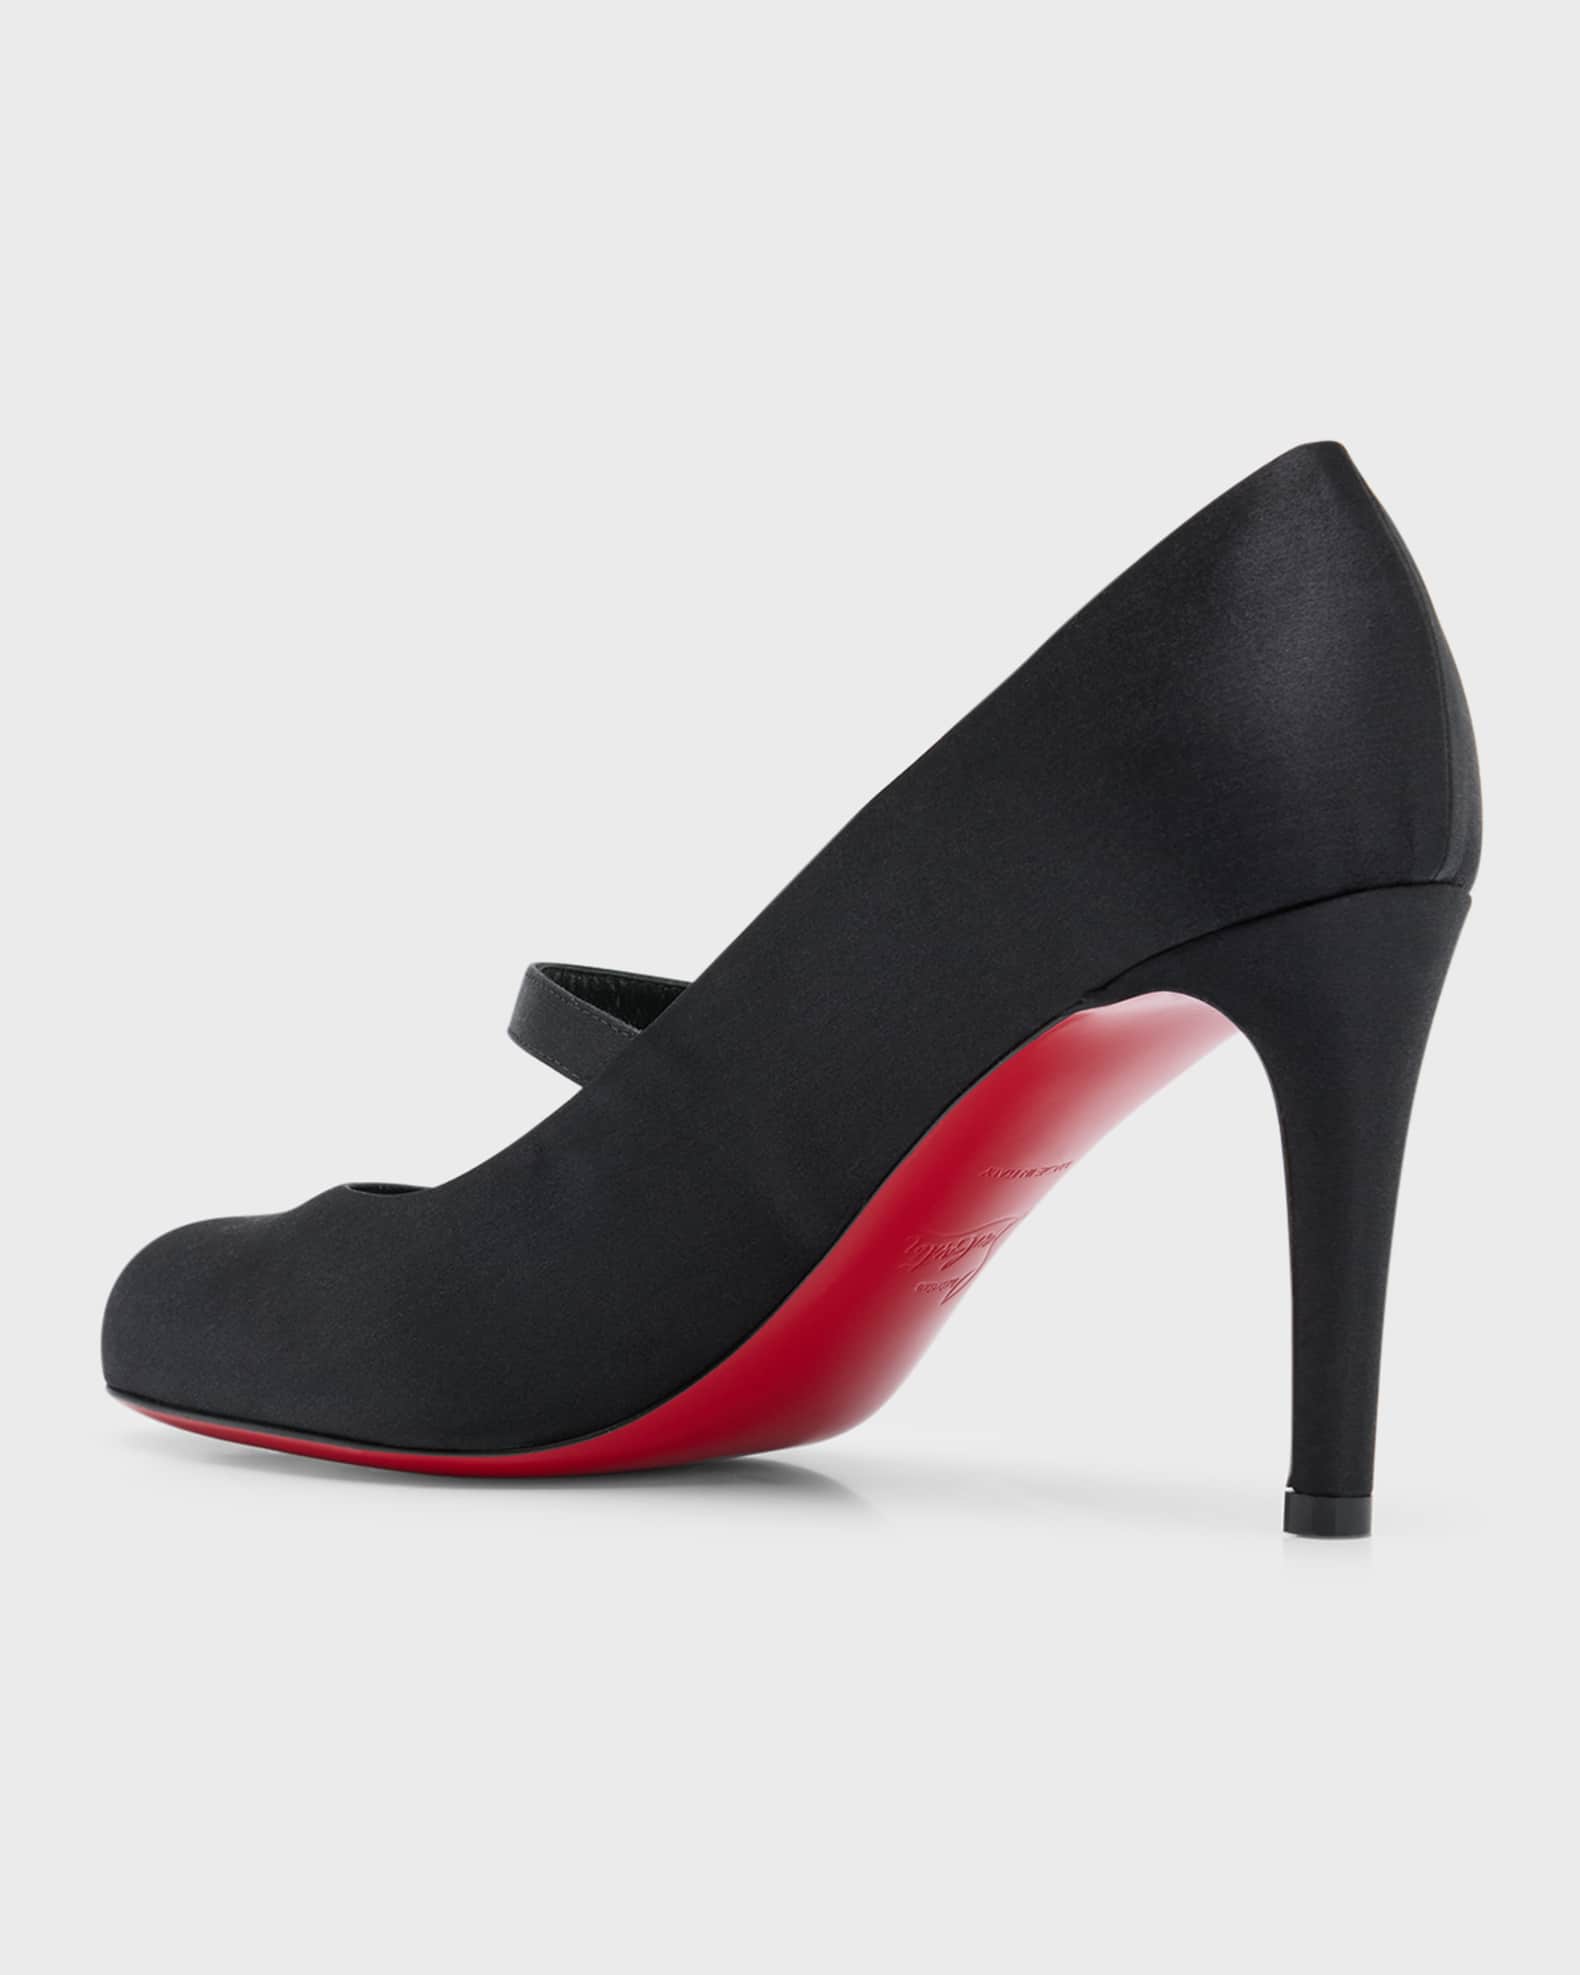 Christian Louboutin Pumppie Wallis Red Sole Crepe Satin Mary Jane Pumps ...